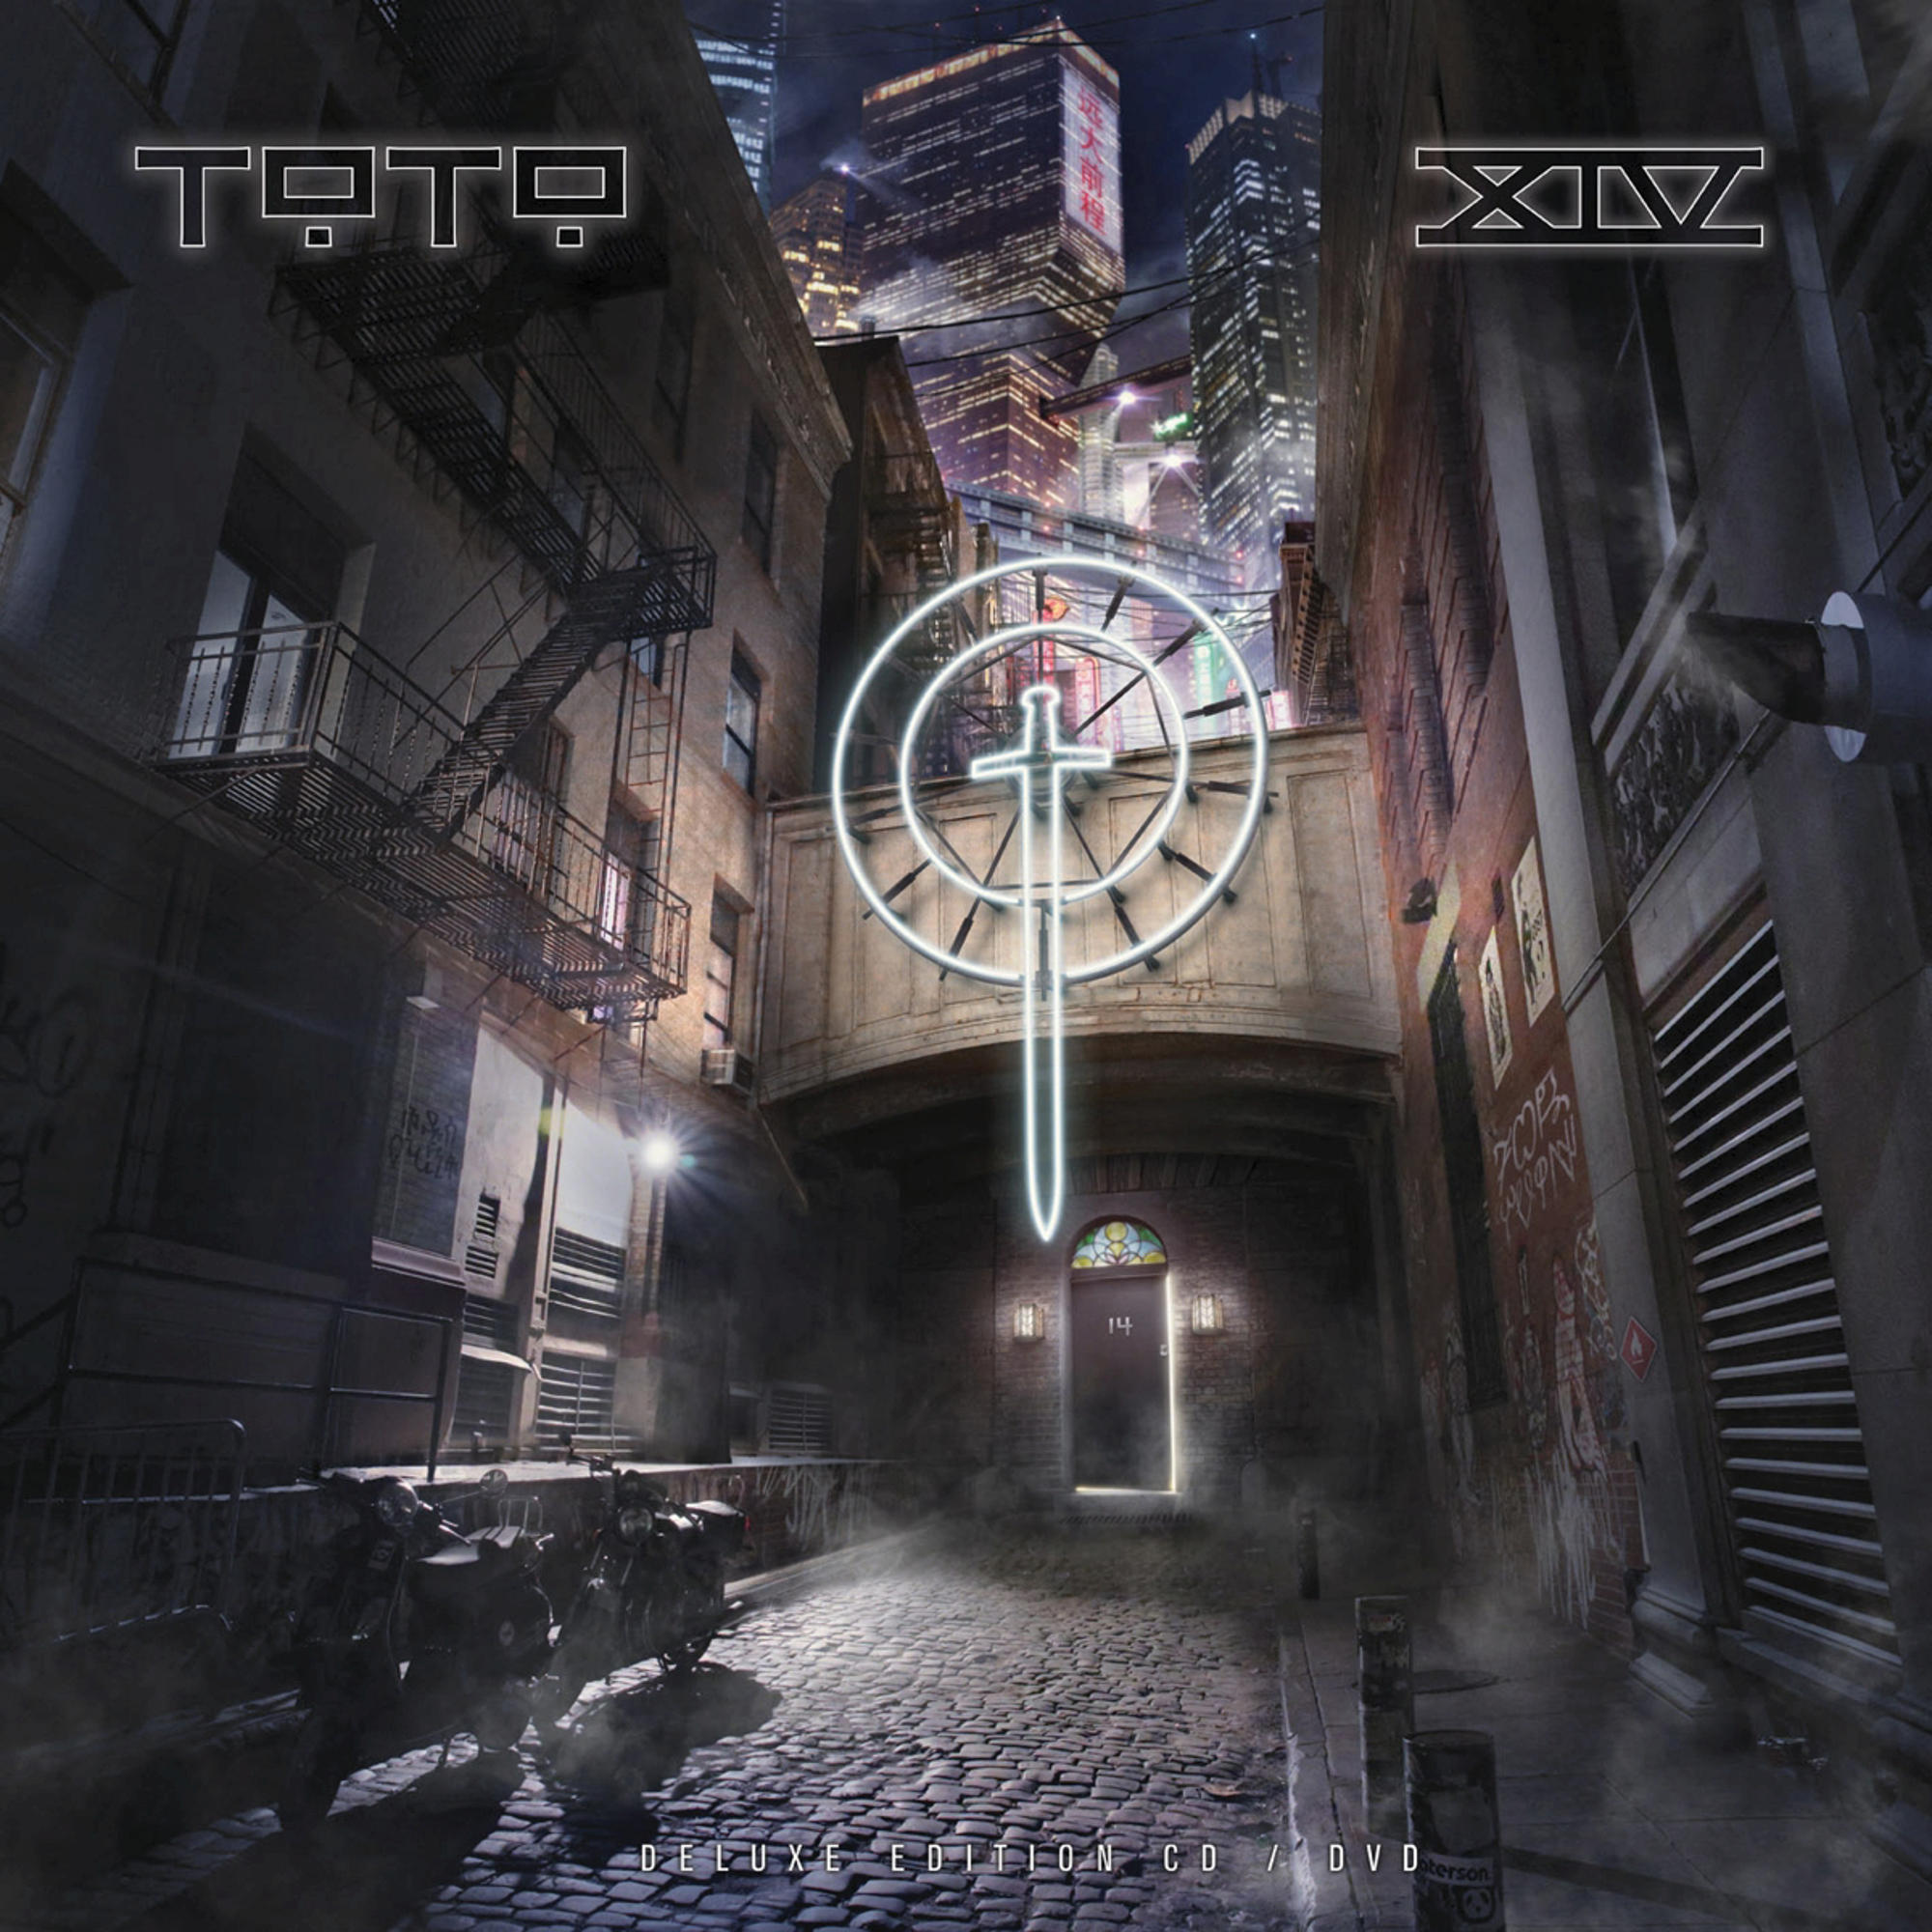 + DVD Edition) Toto - (CD Ecolbook XIV (Limited - Toto Video)